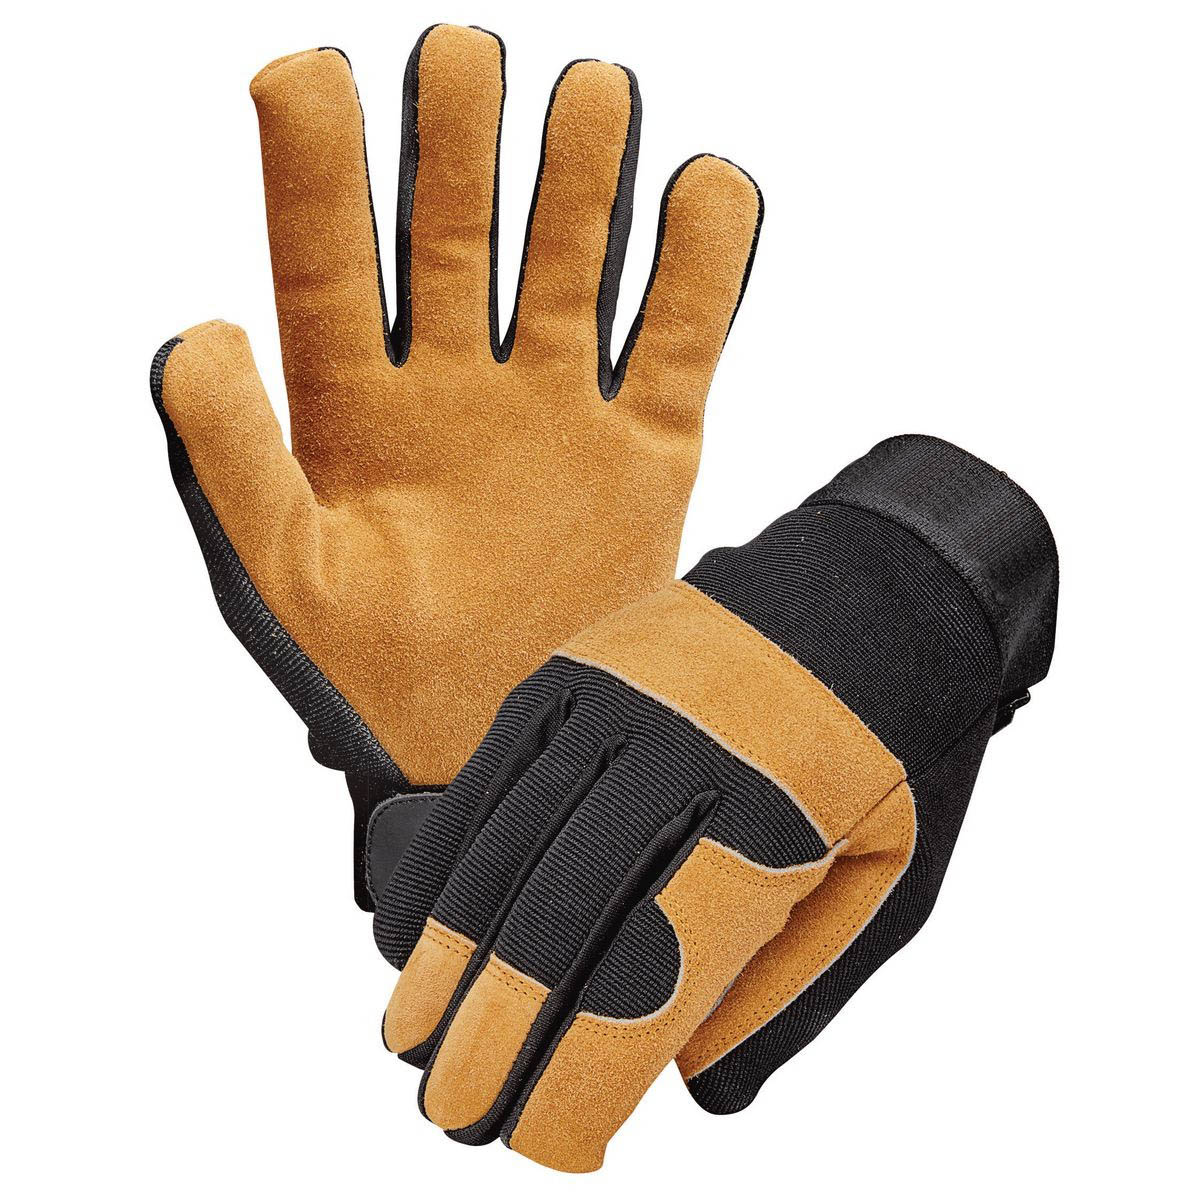 High quality breathable Split Leather Work Gloves